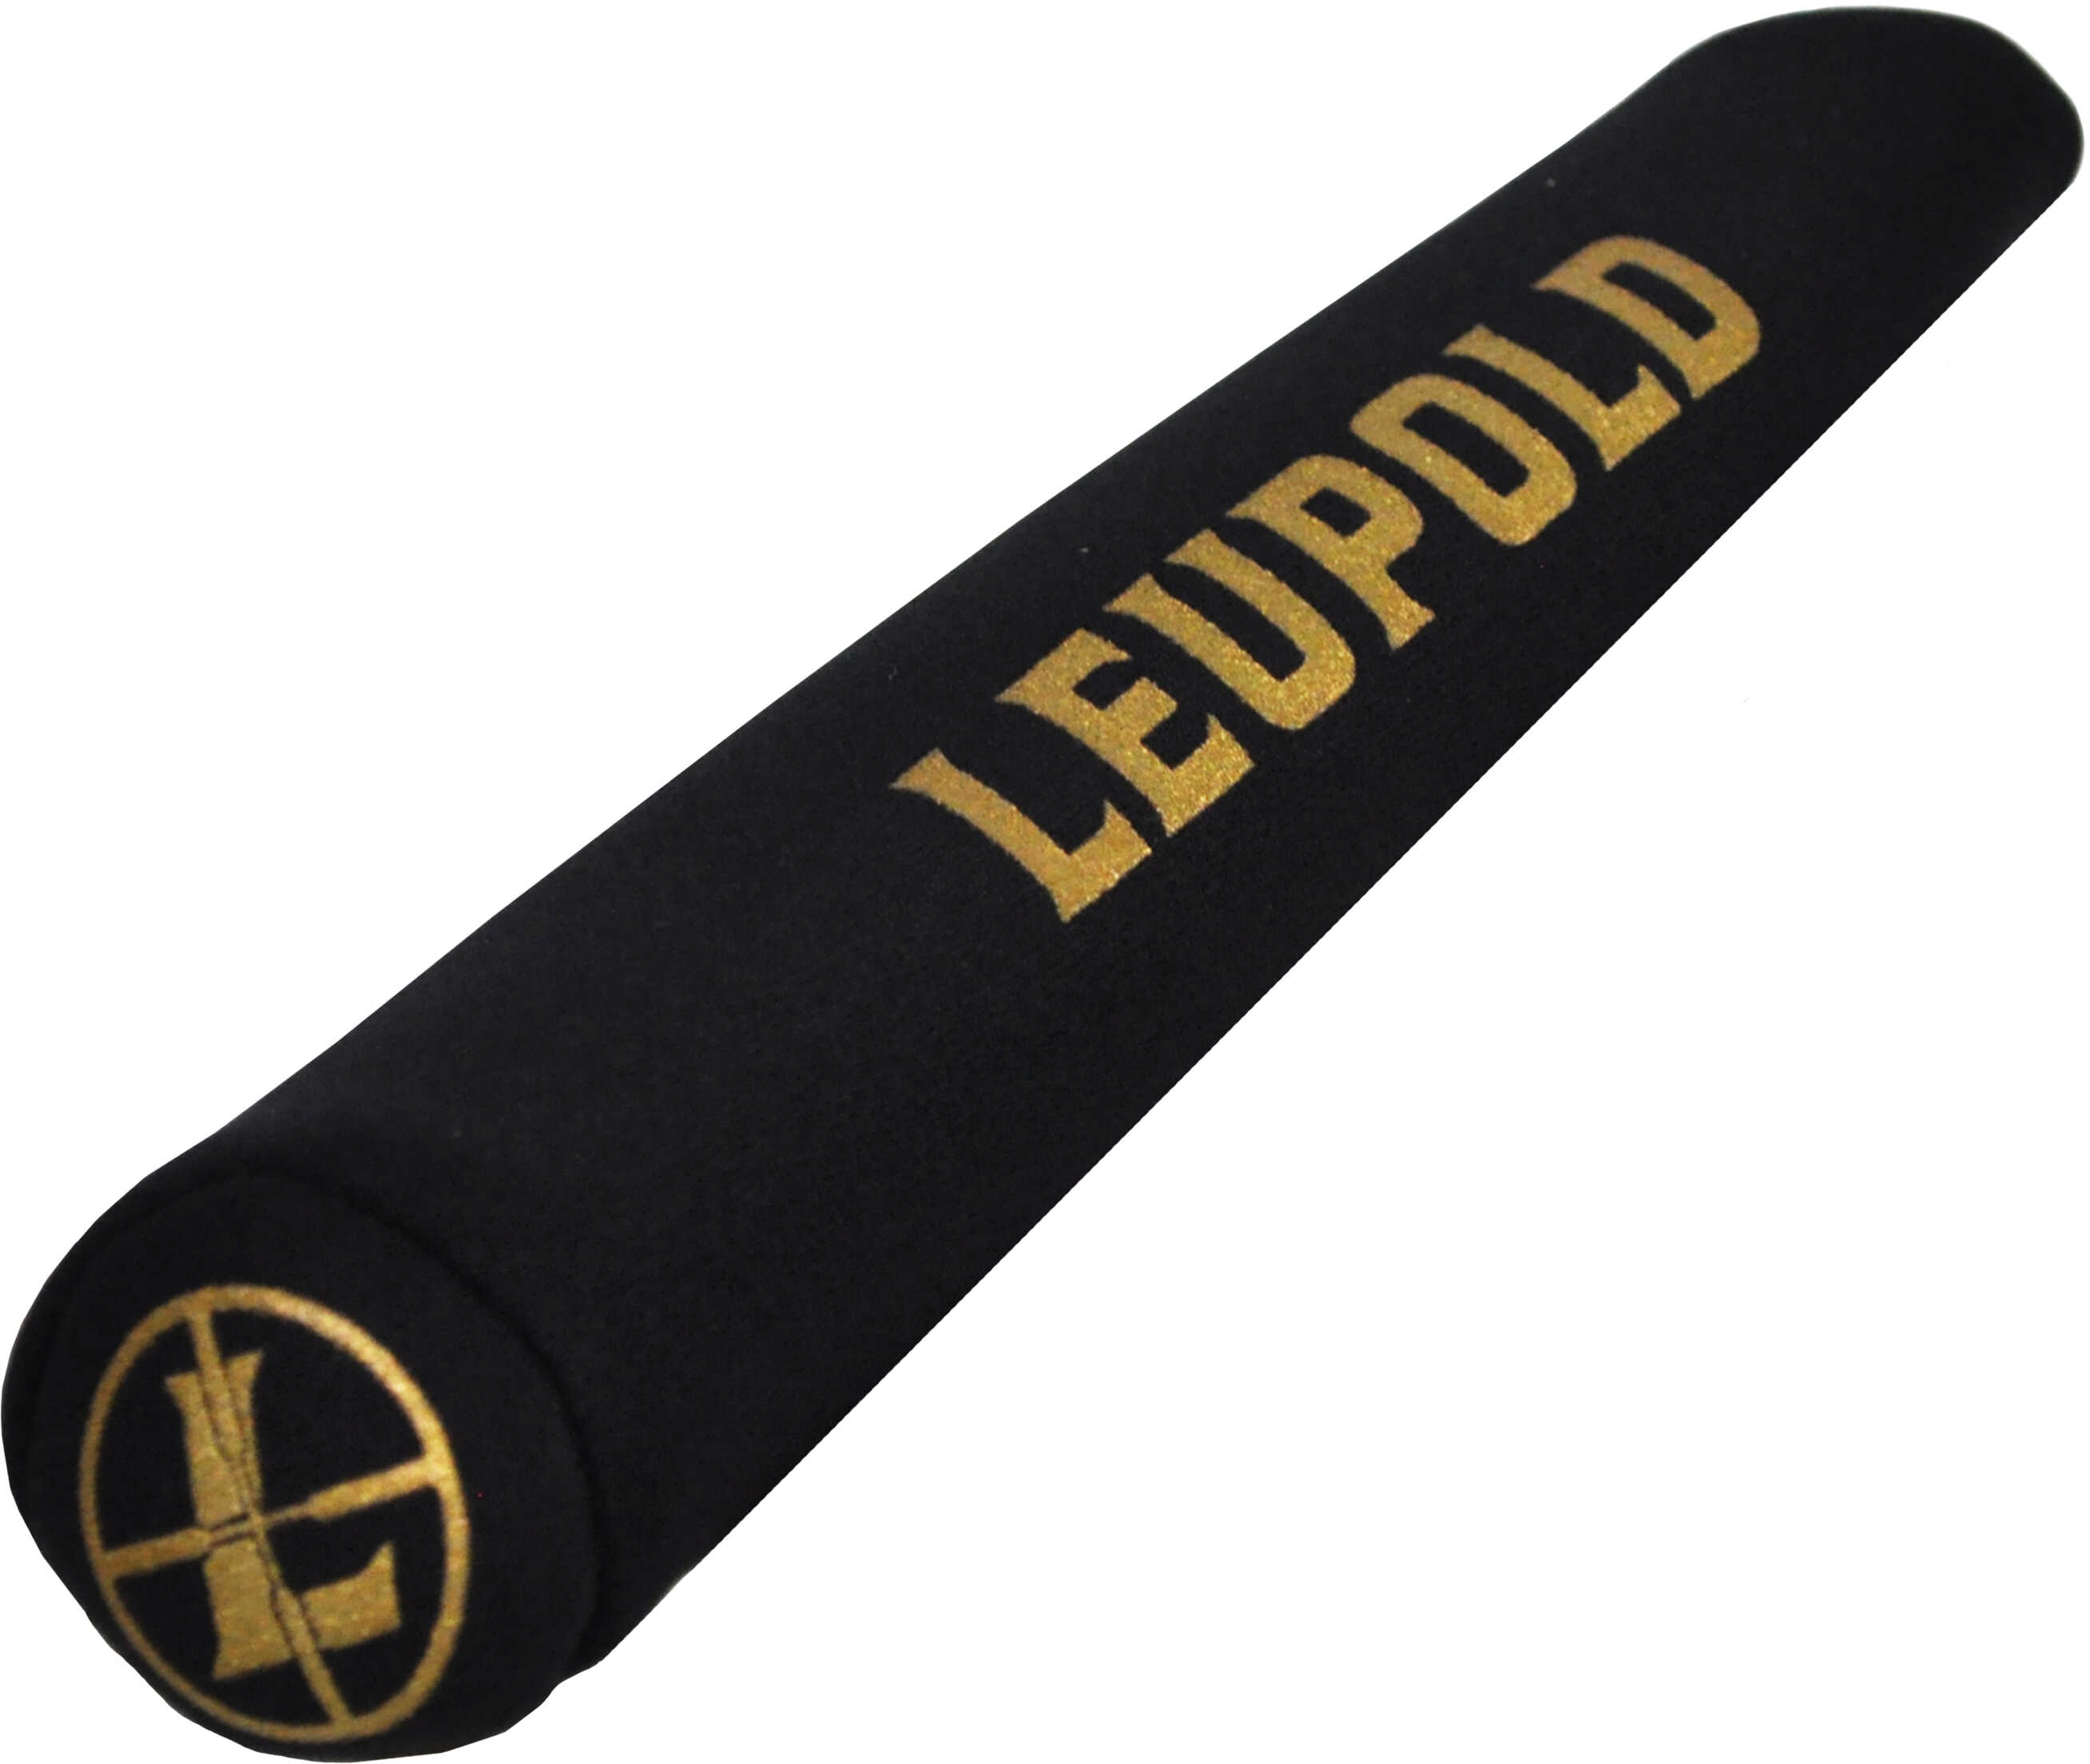 Leupold Scope Cover X-Large